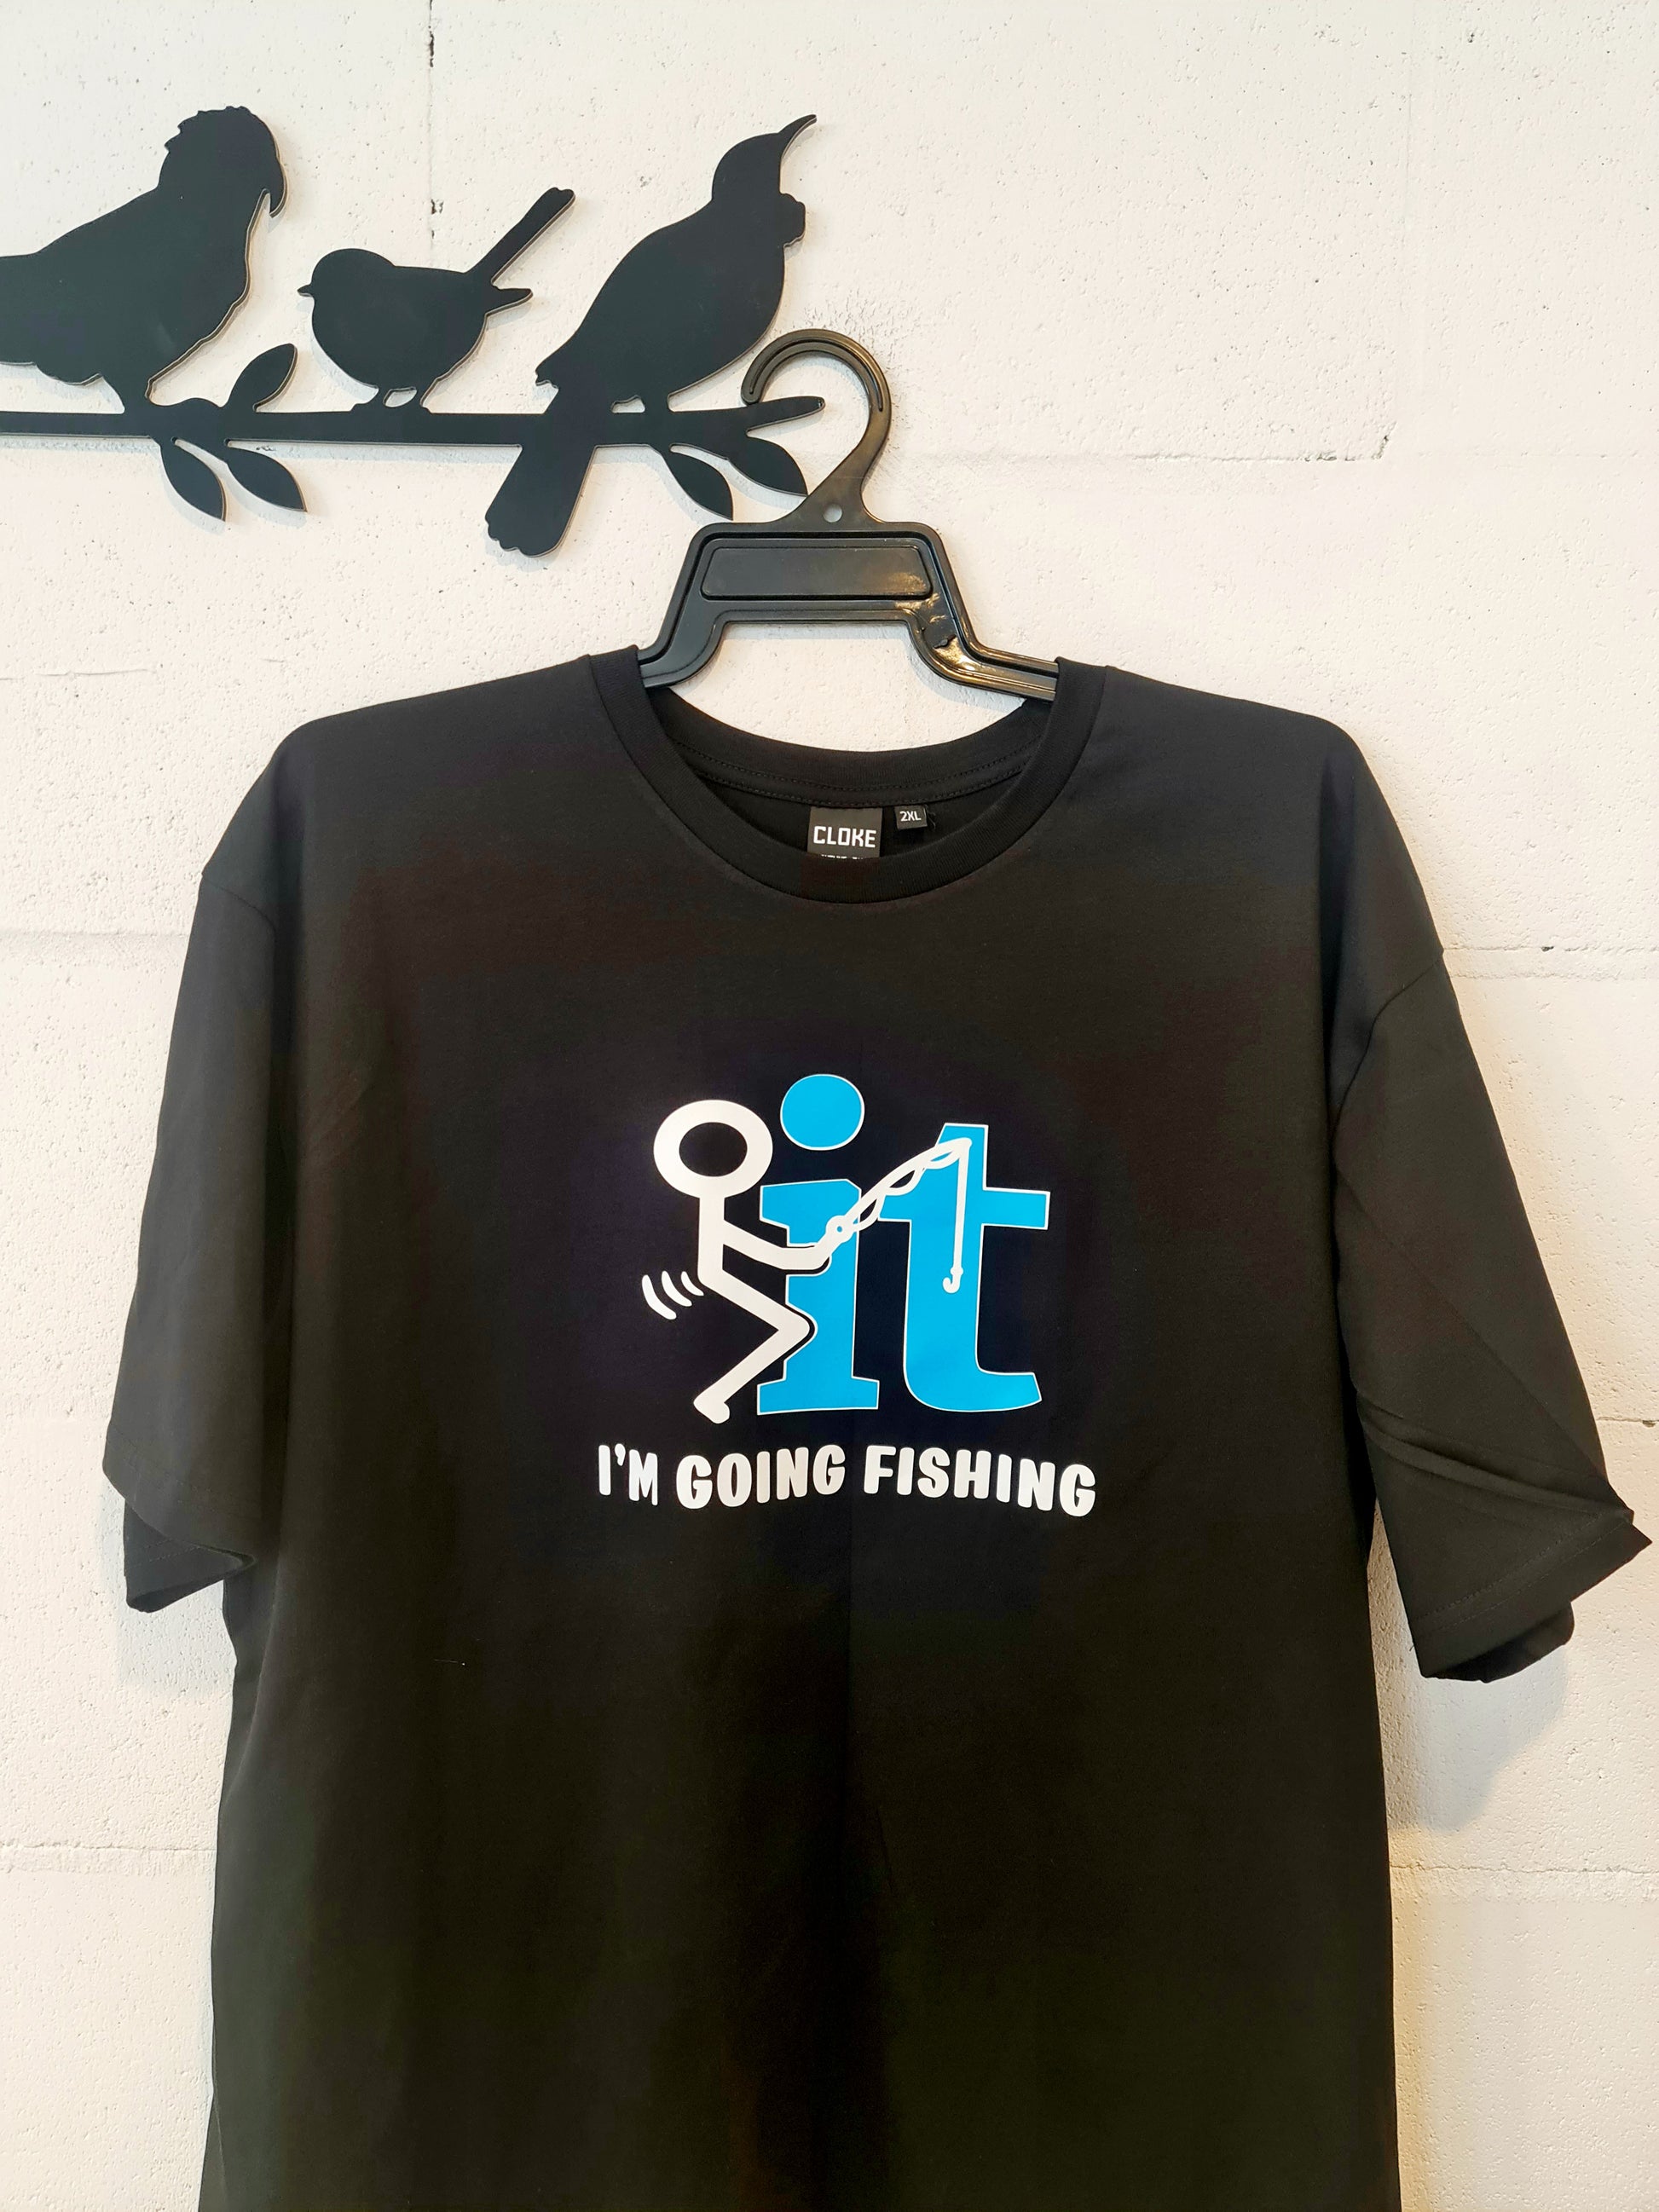 Stickman holding a fishing rod fn the it and going fishing